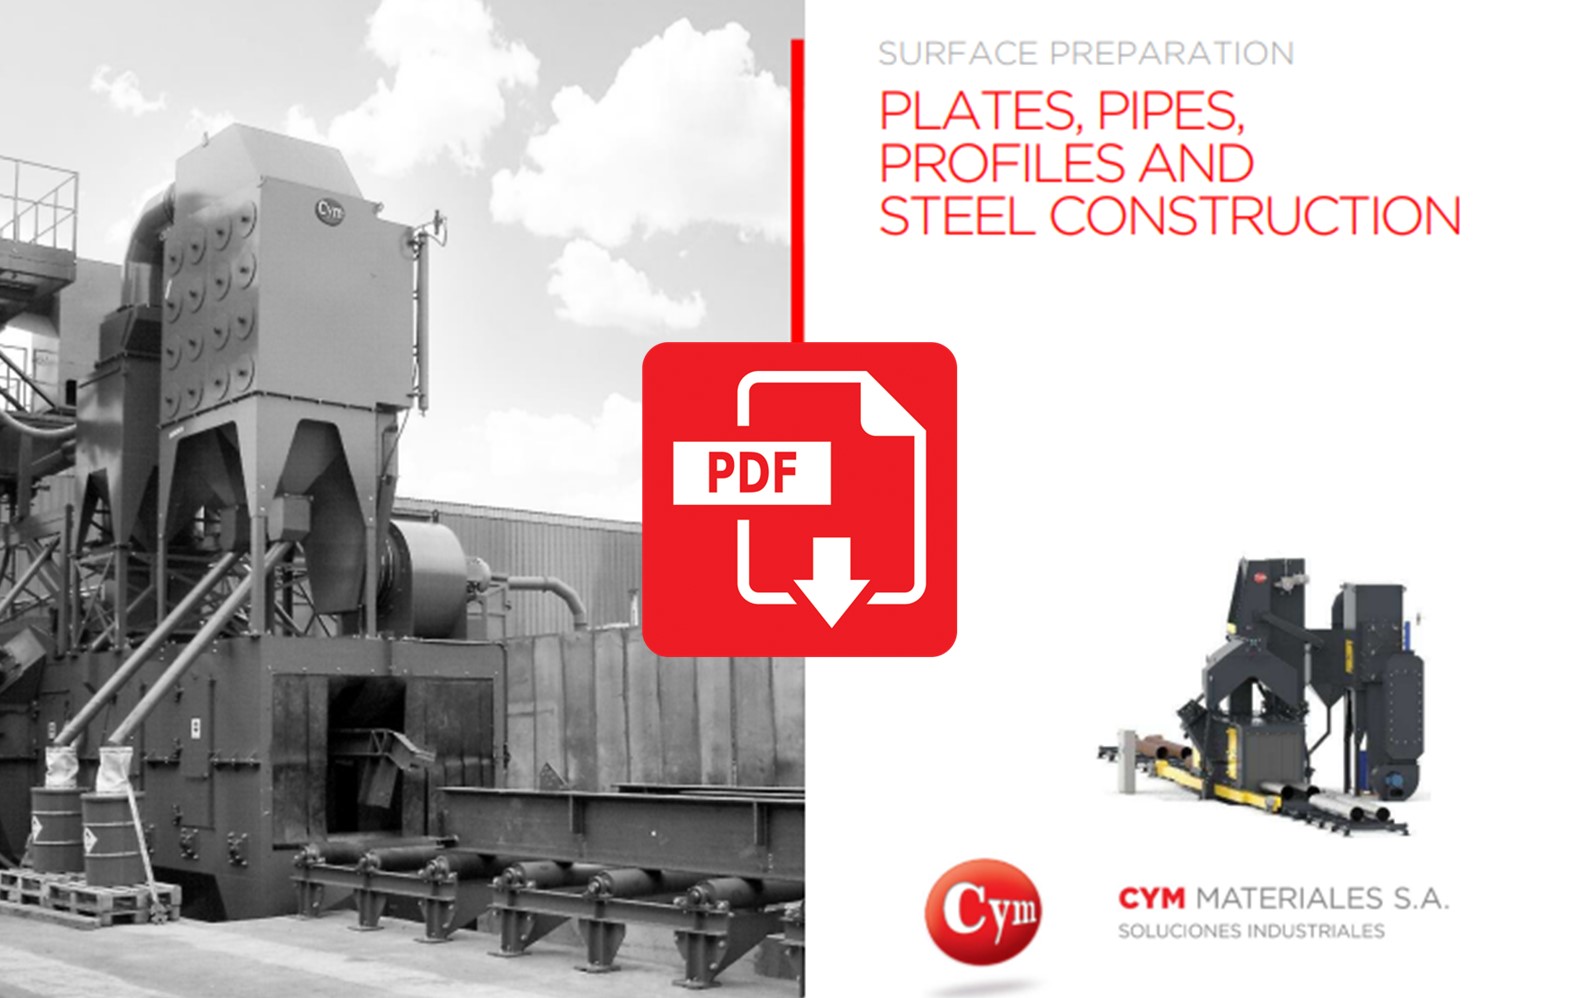 PLATES, PIPES, PROFILES AND STEEL CONSTRUCTION